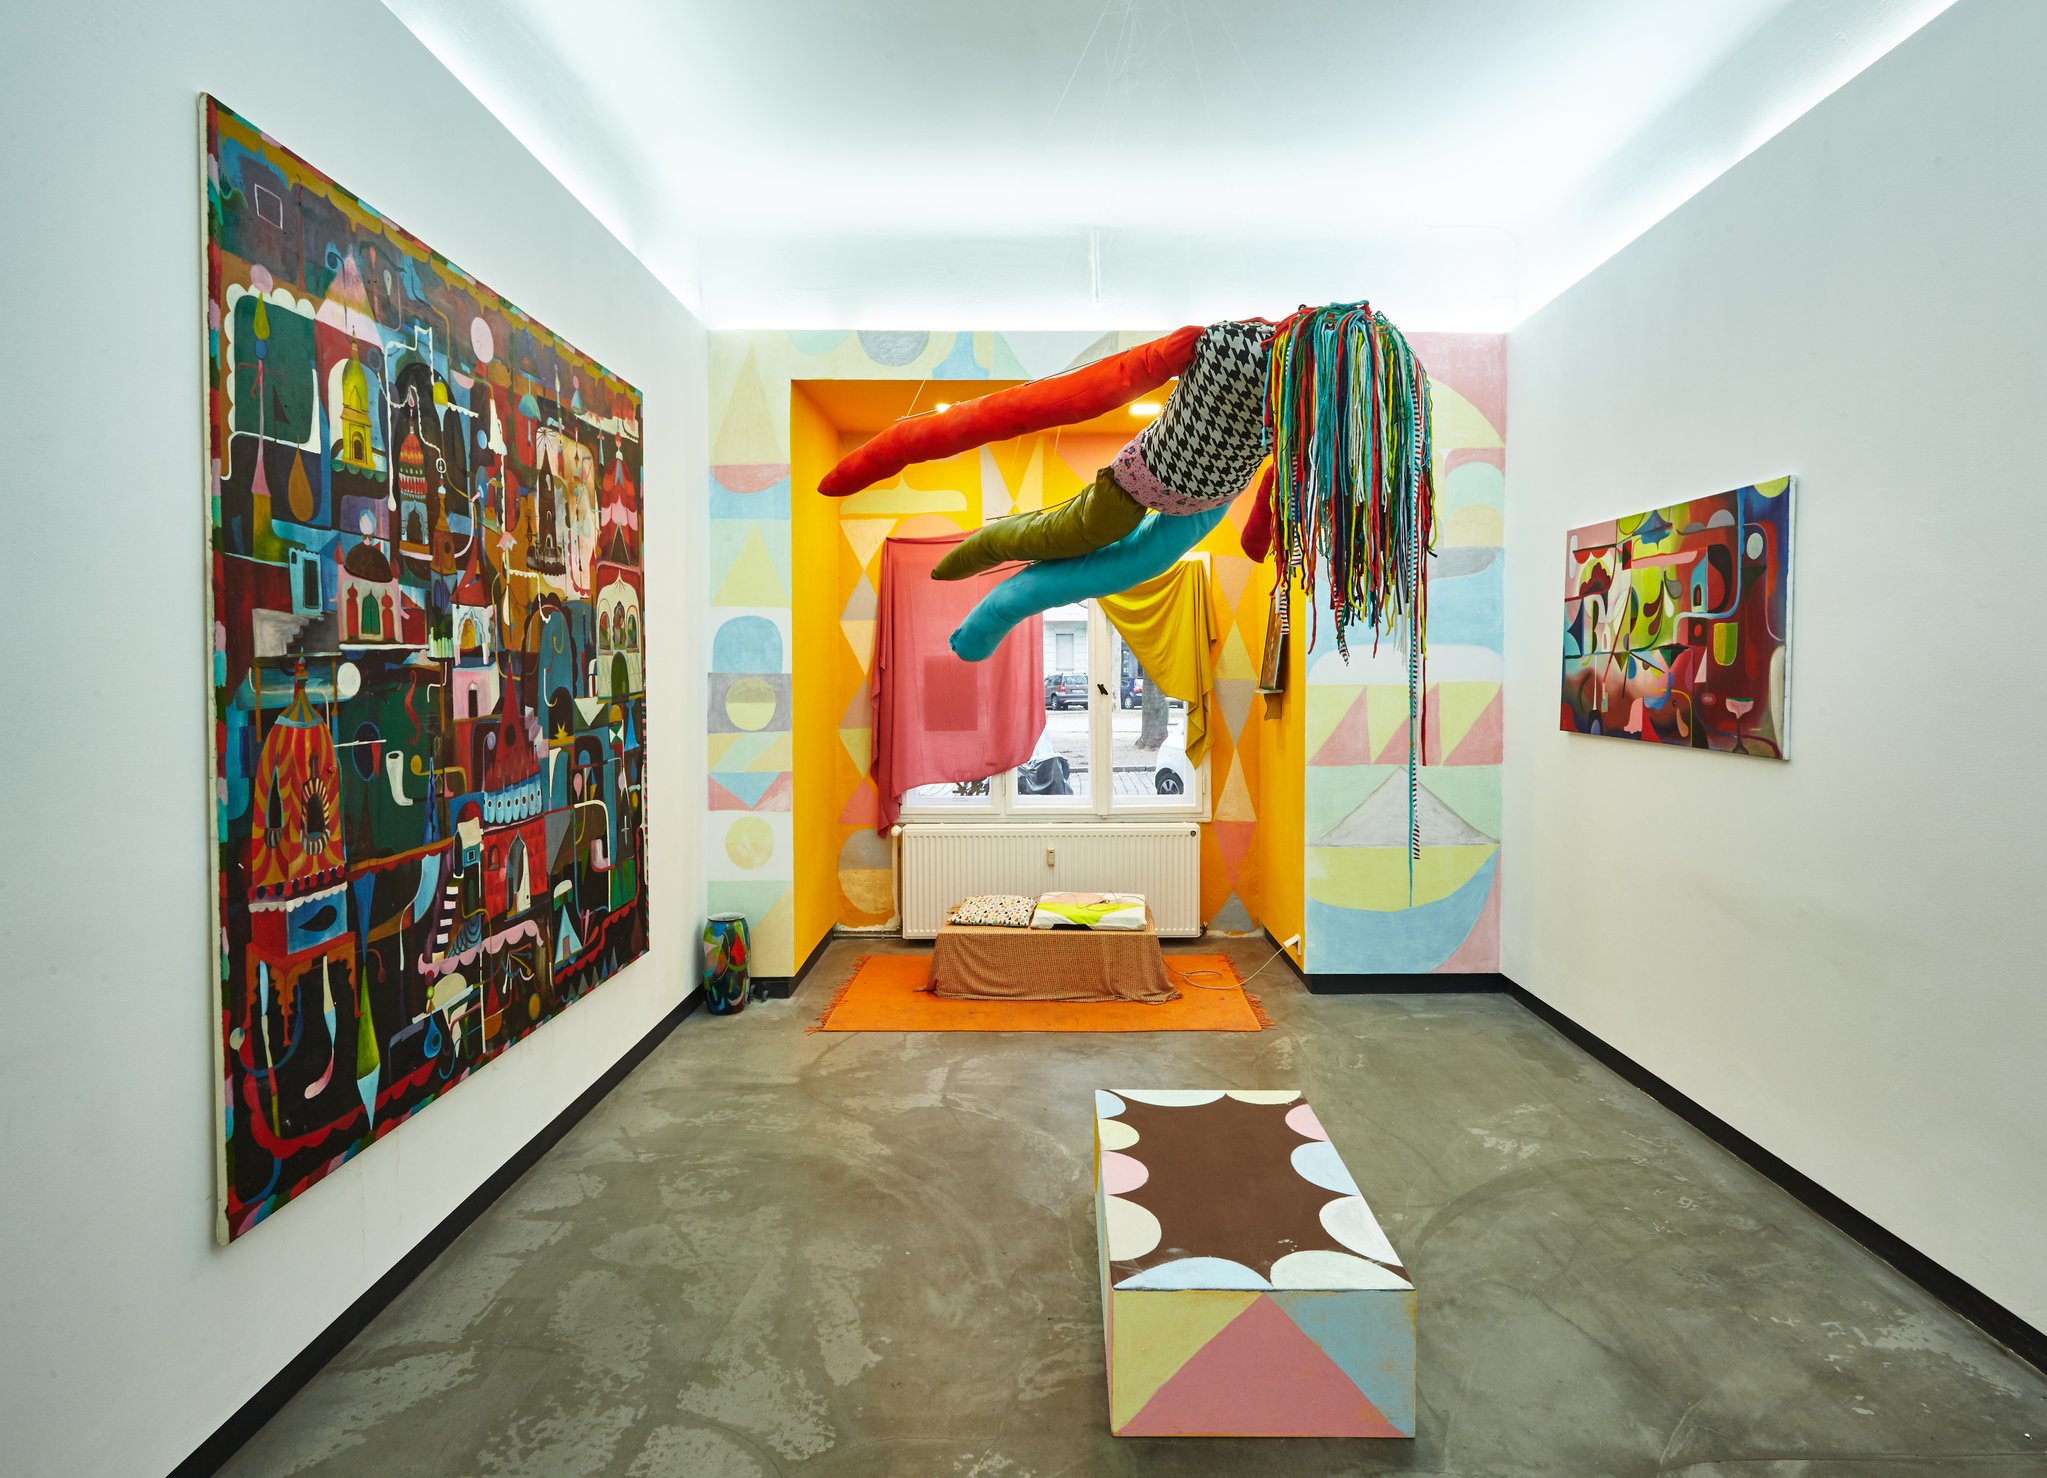 Installation view from "Here in the Real World"